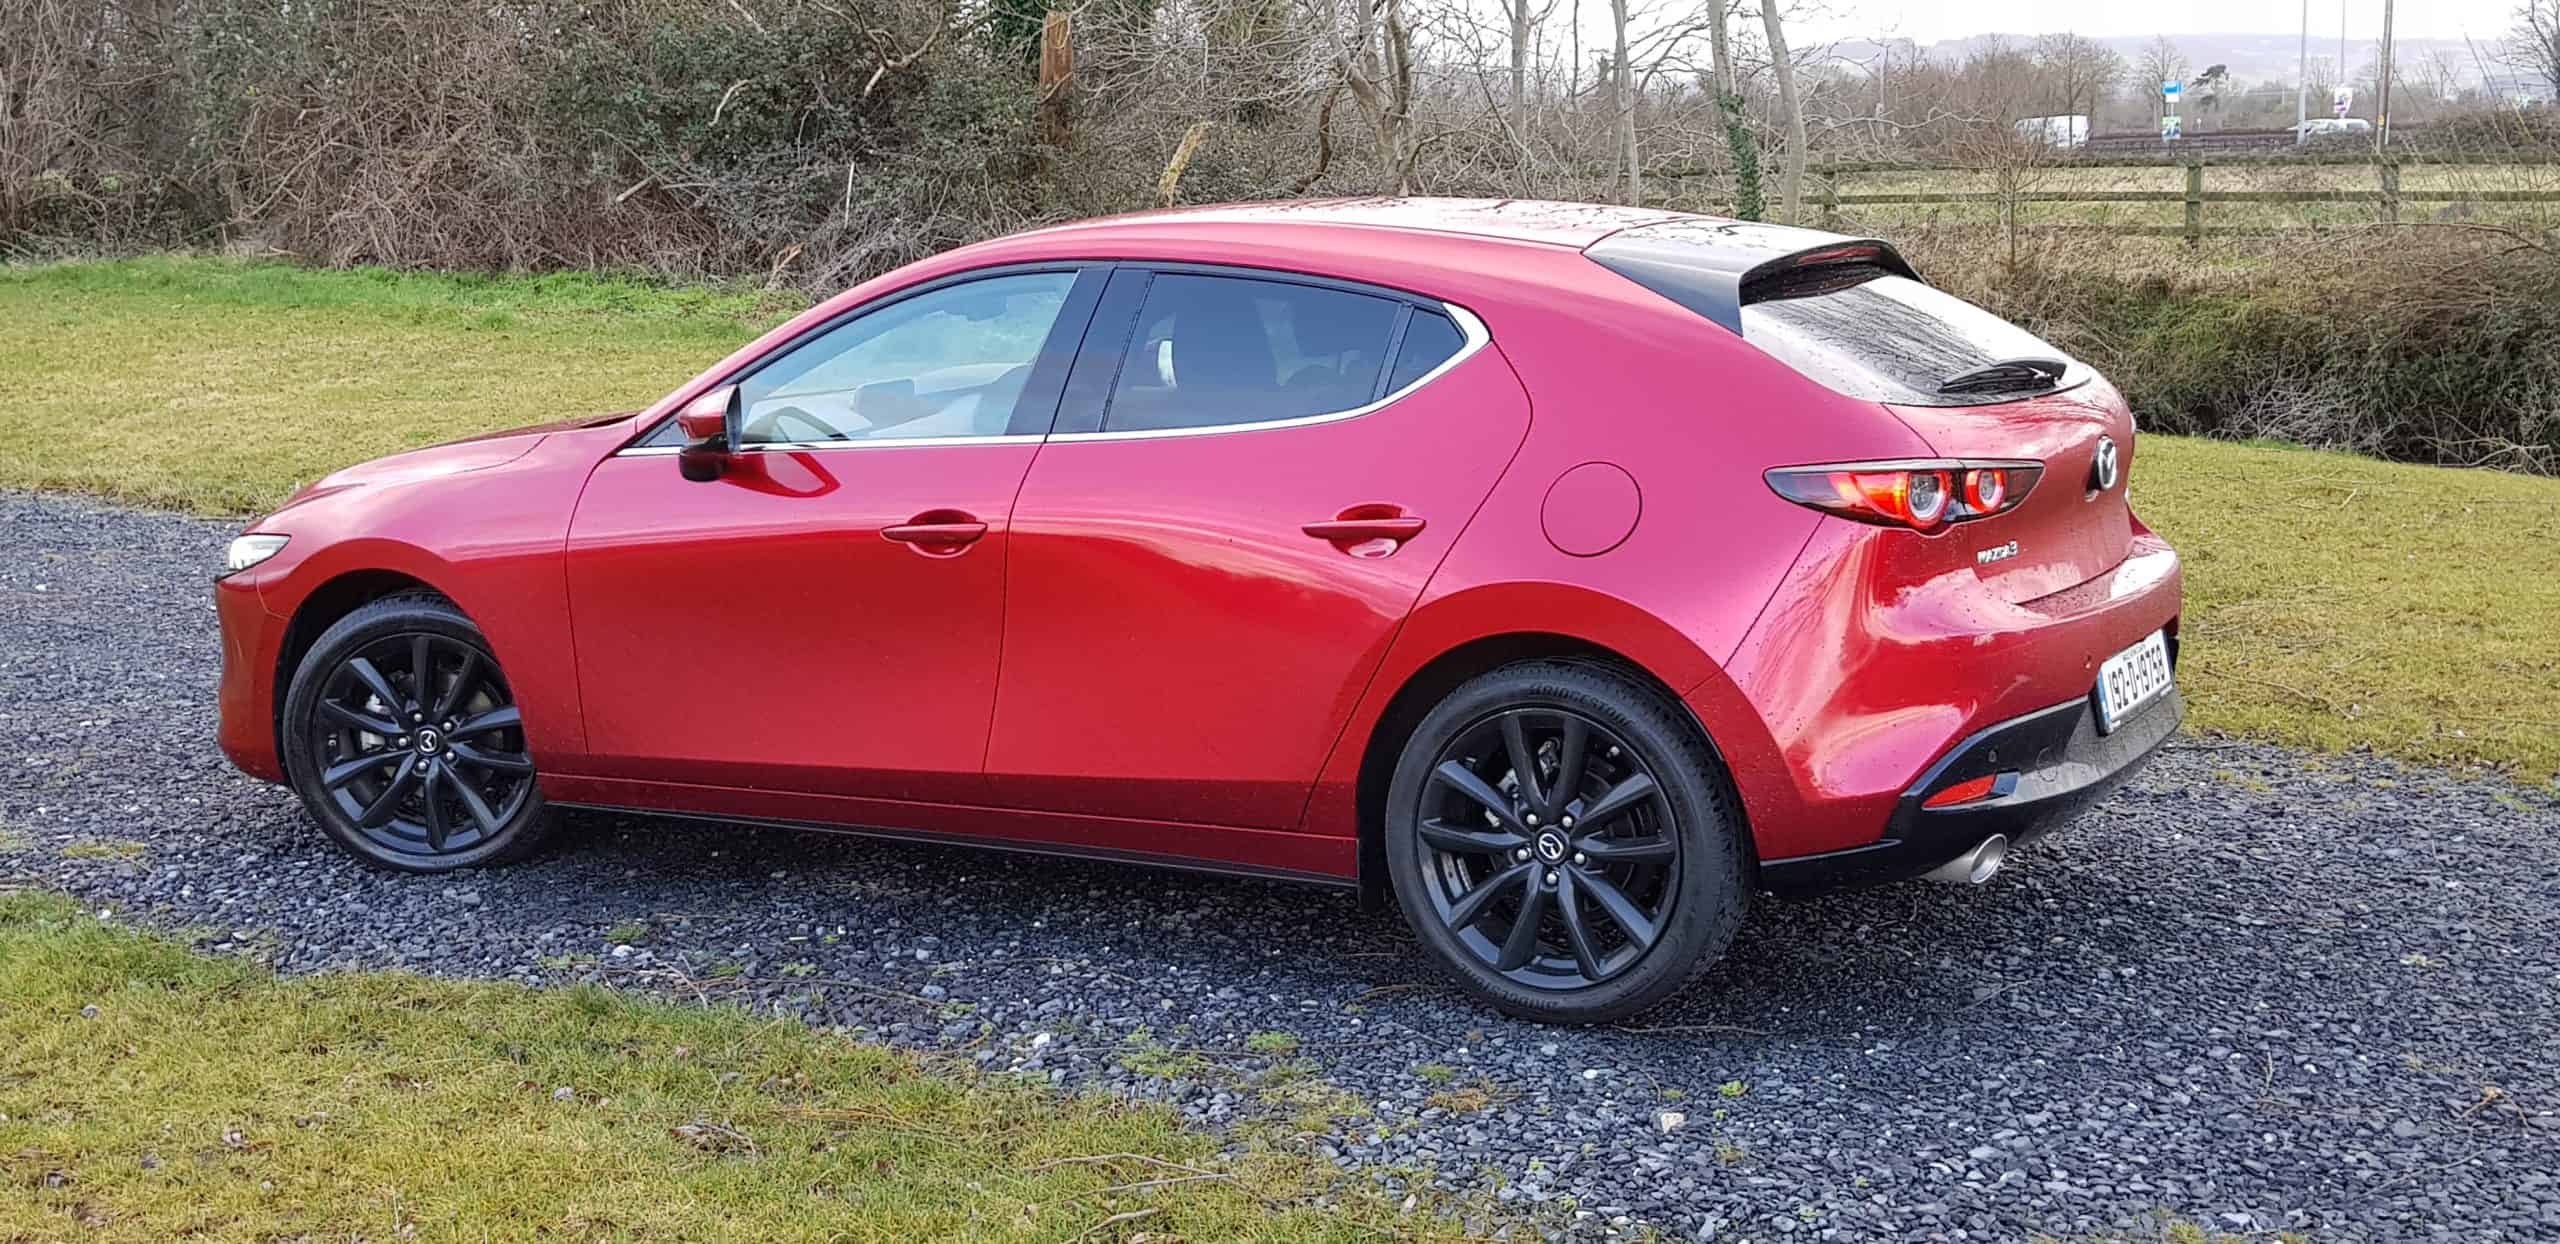 New Mazda 3 'SkyActiv X' The Family Car With The 'X